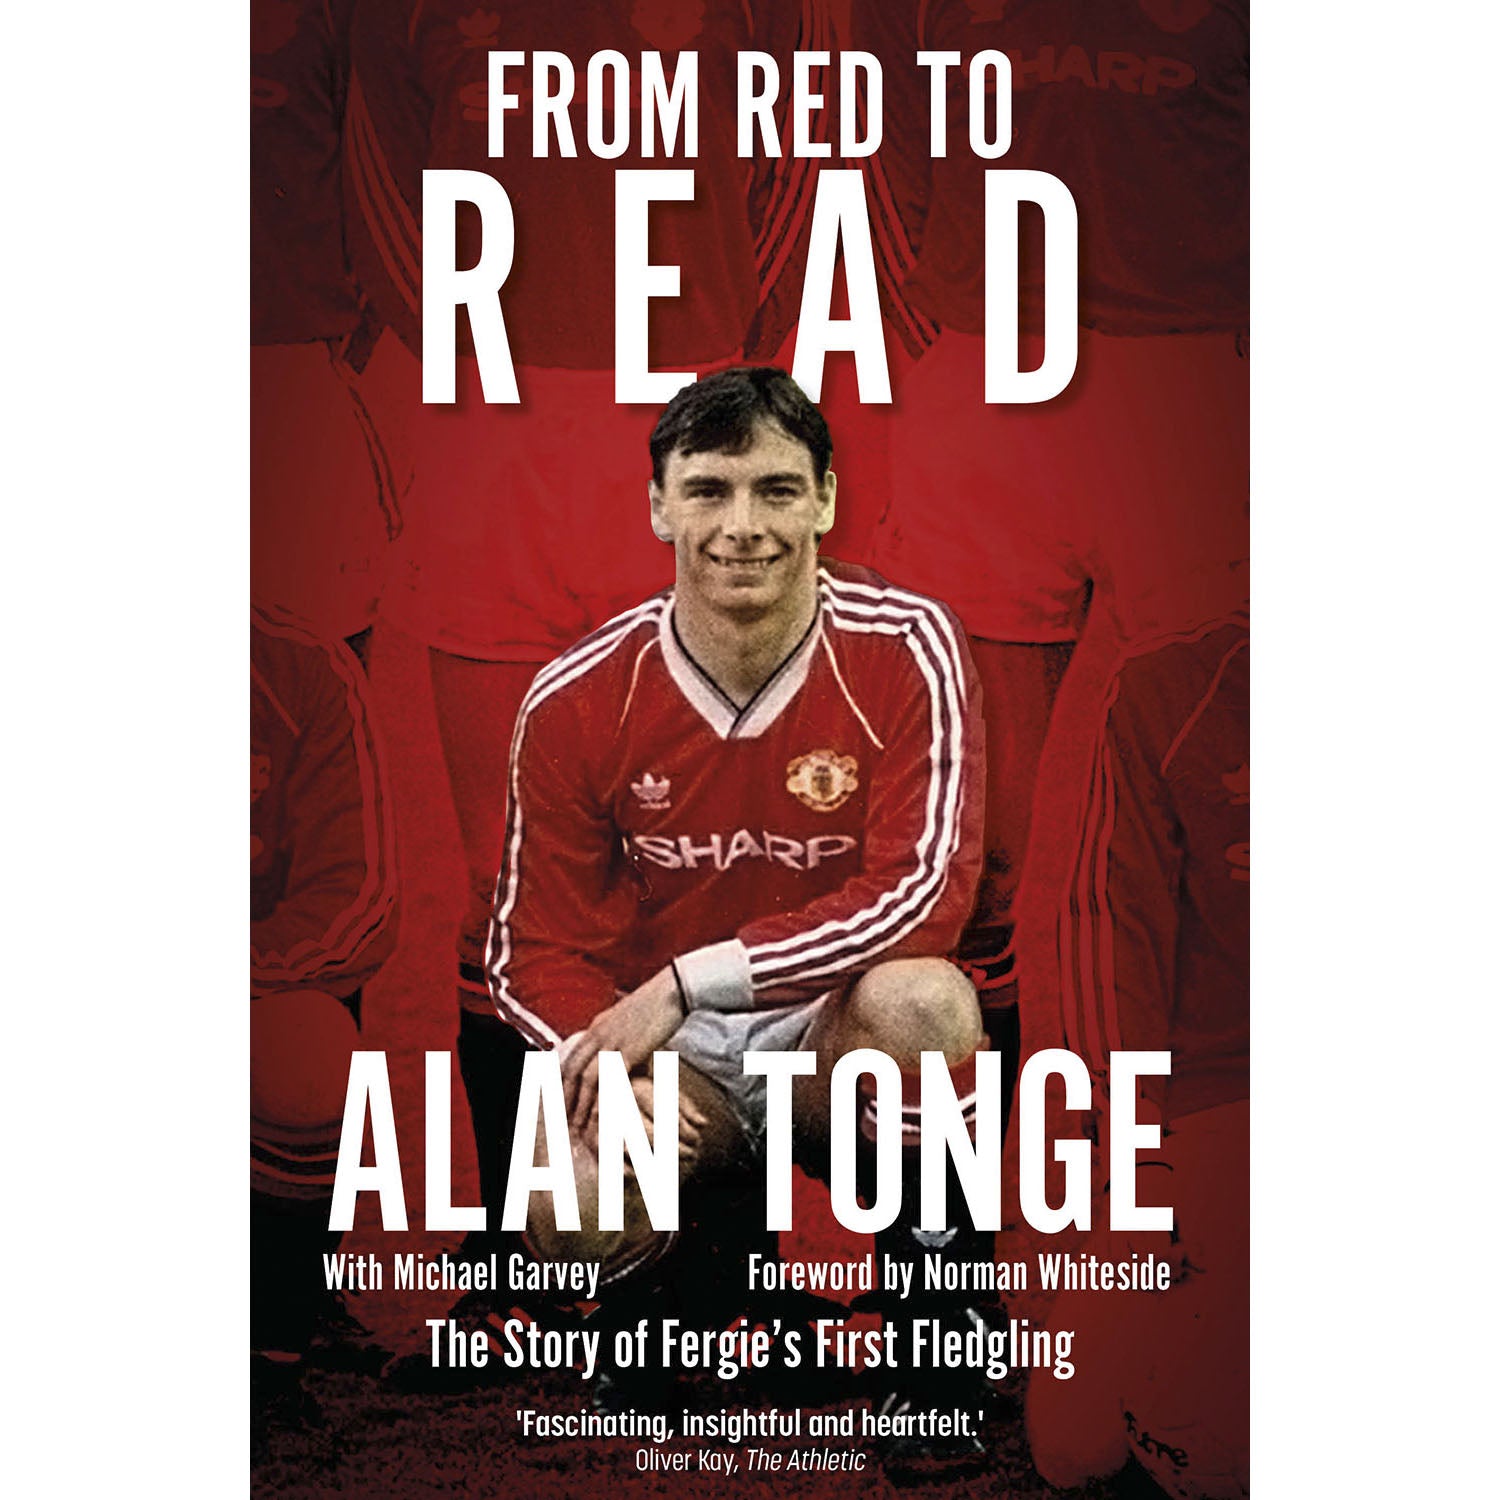 From Red to Read – Alan Tonge – The Story of Fergie's First Fledgling